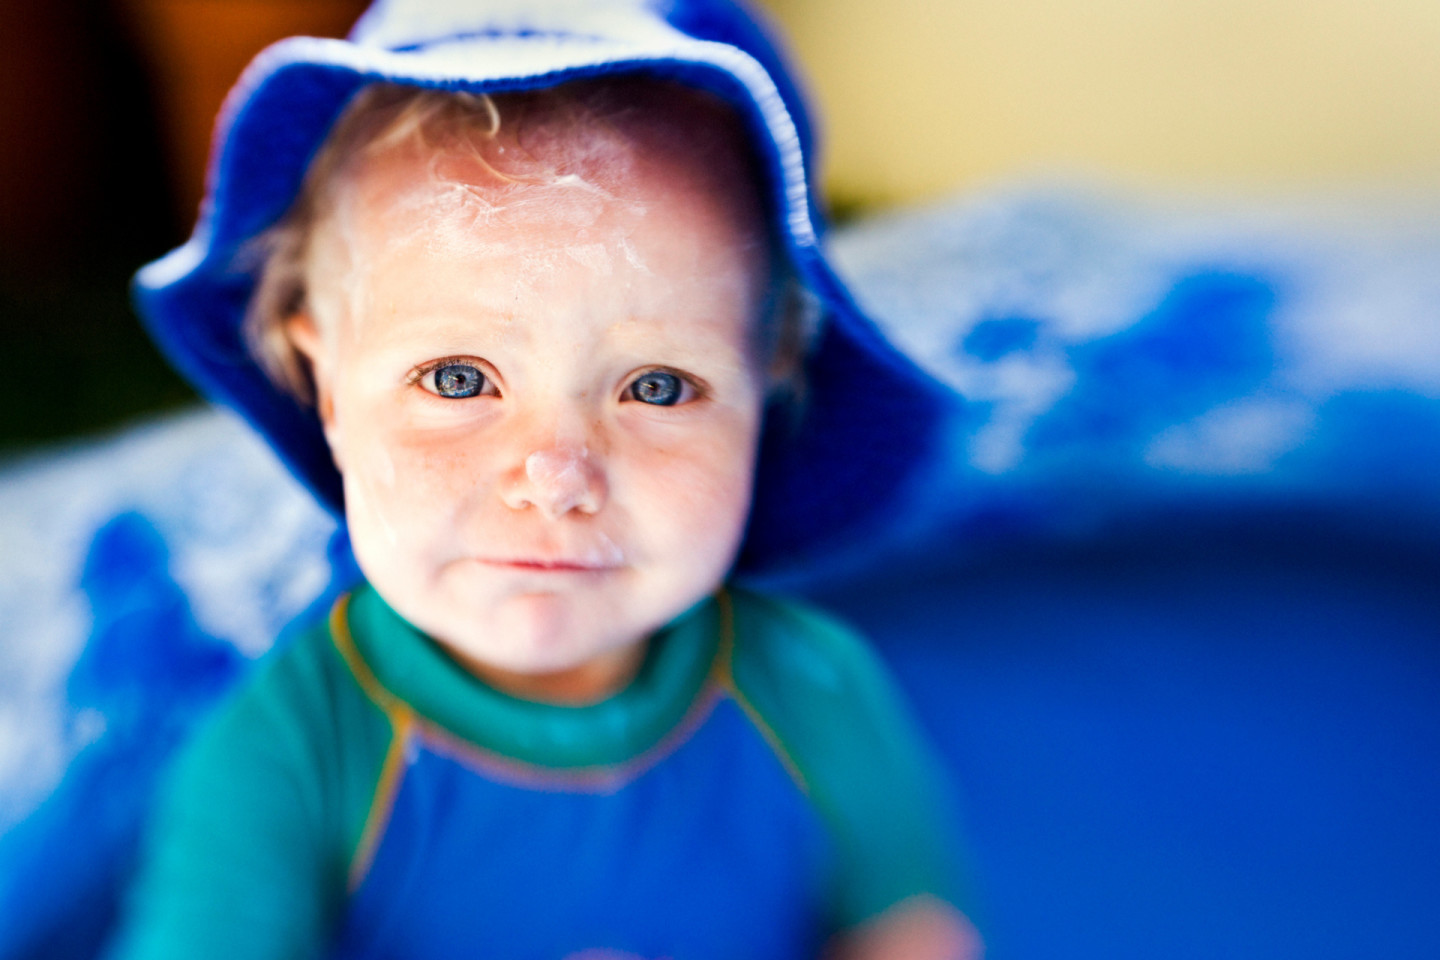 sunscreen chemicals for babies